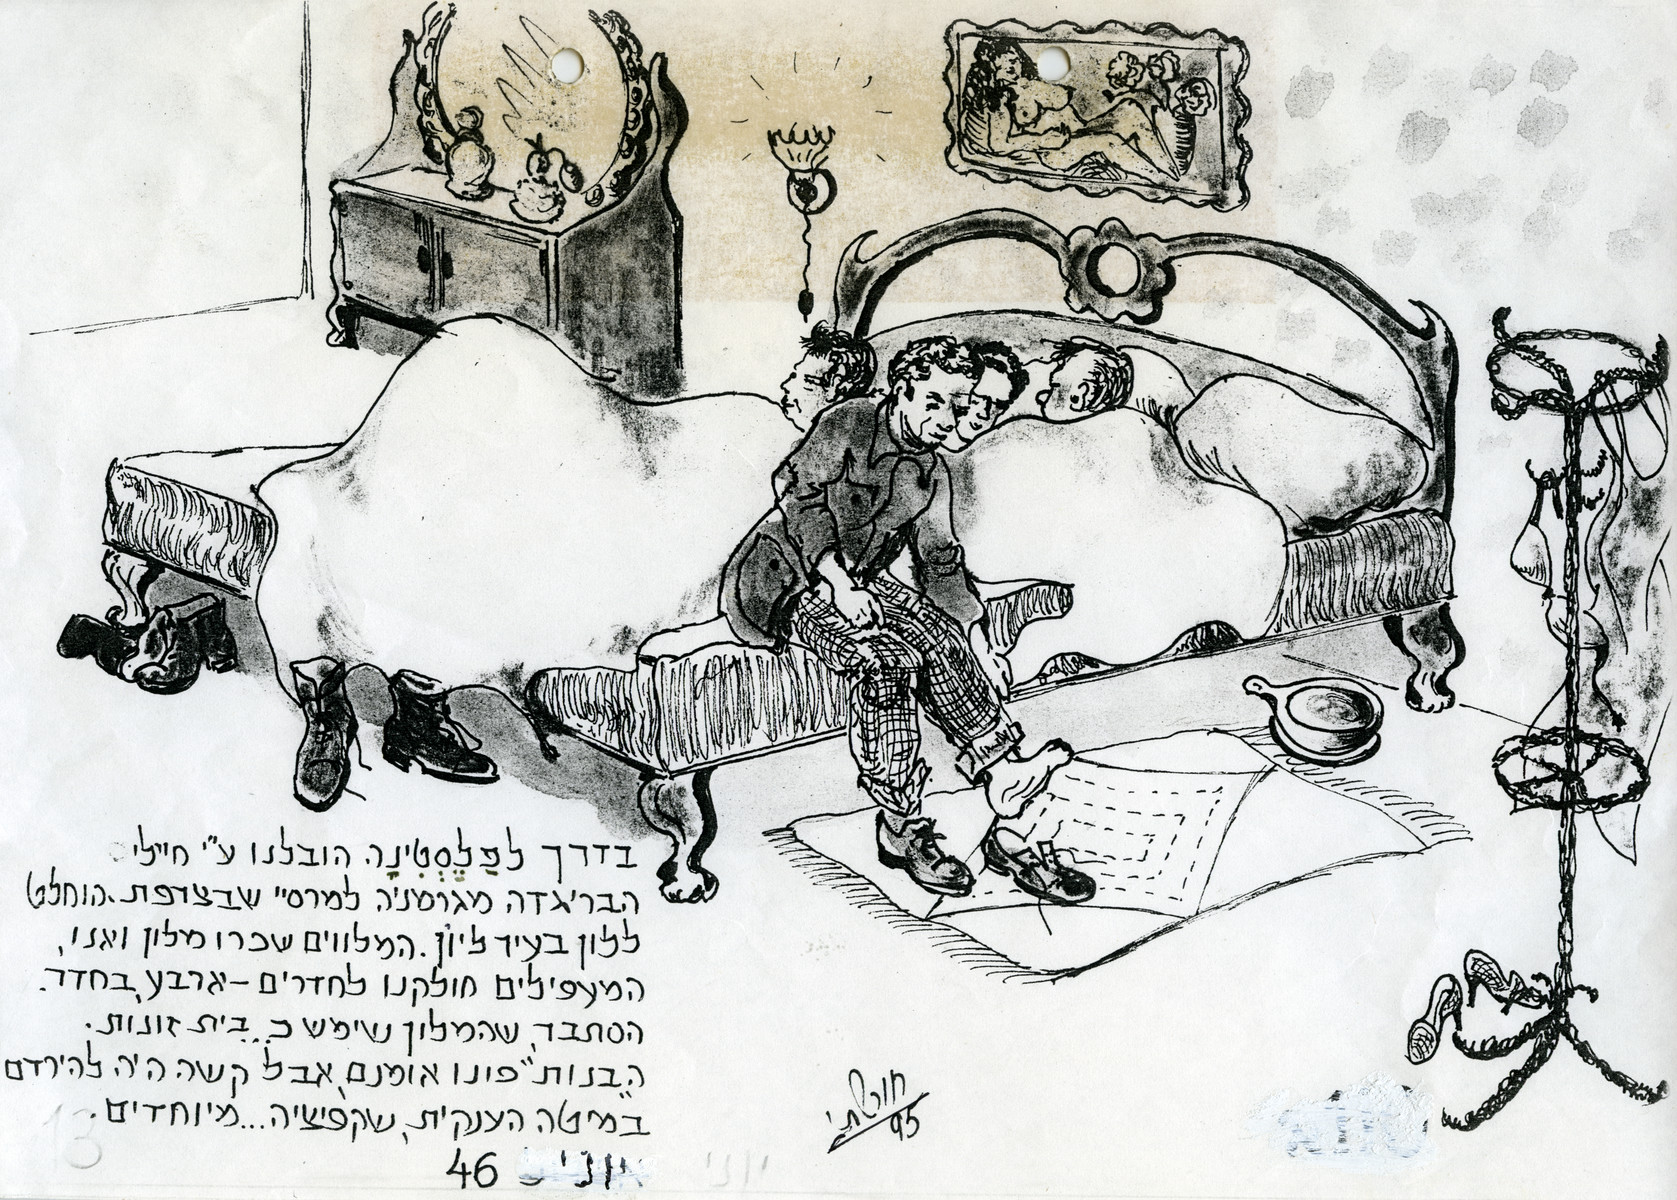 Page of a pictoral memoir drawn by the donor documenting his experiences after the Holocaust.

The drawing depicts Jewish displaced persons sleeping four to a room in a hotel in Lyons while en route to Marseilles to catch a ship to Palestine. [Chronologcally this drawing follows w/s 55077]